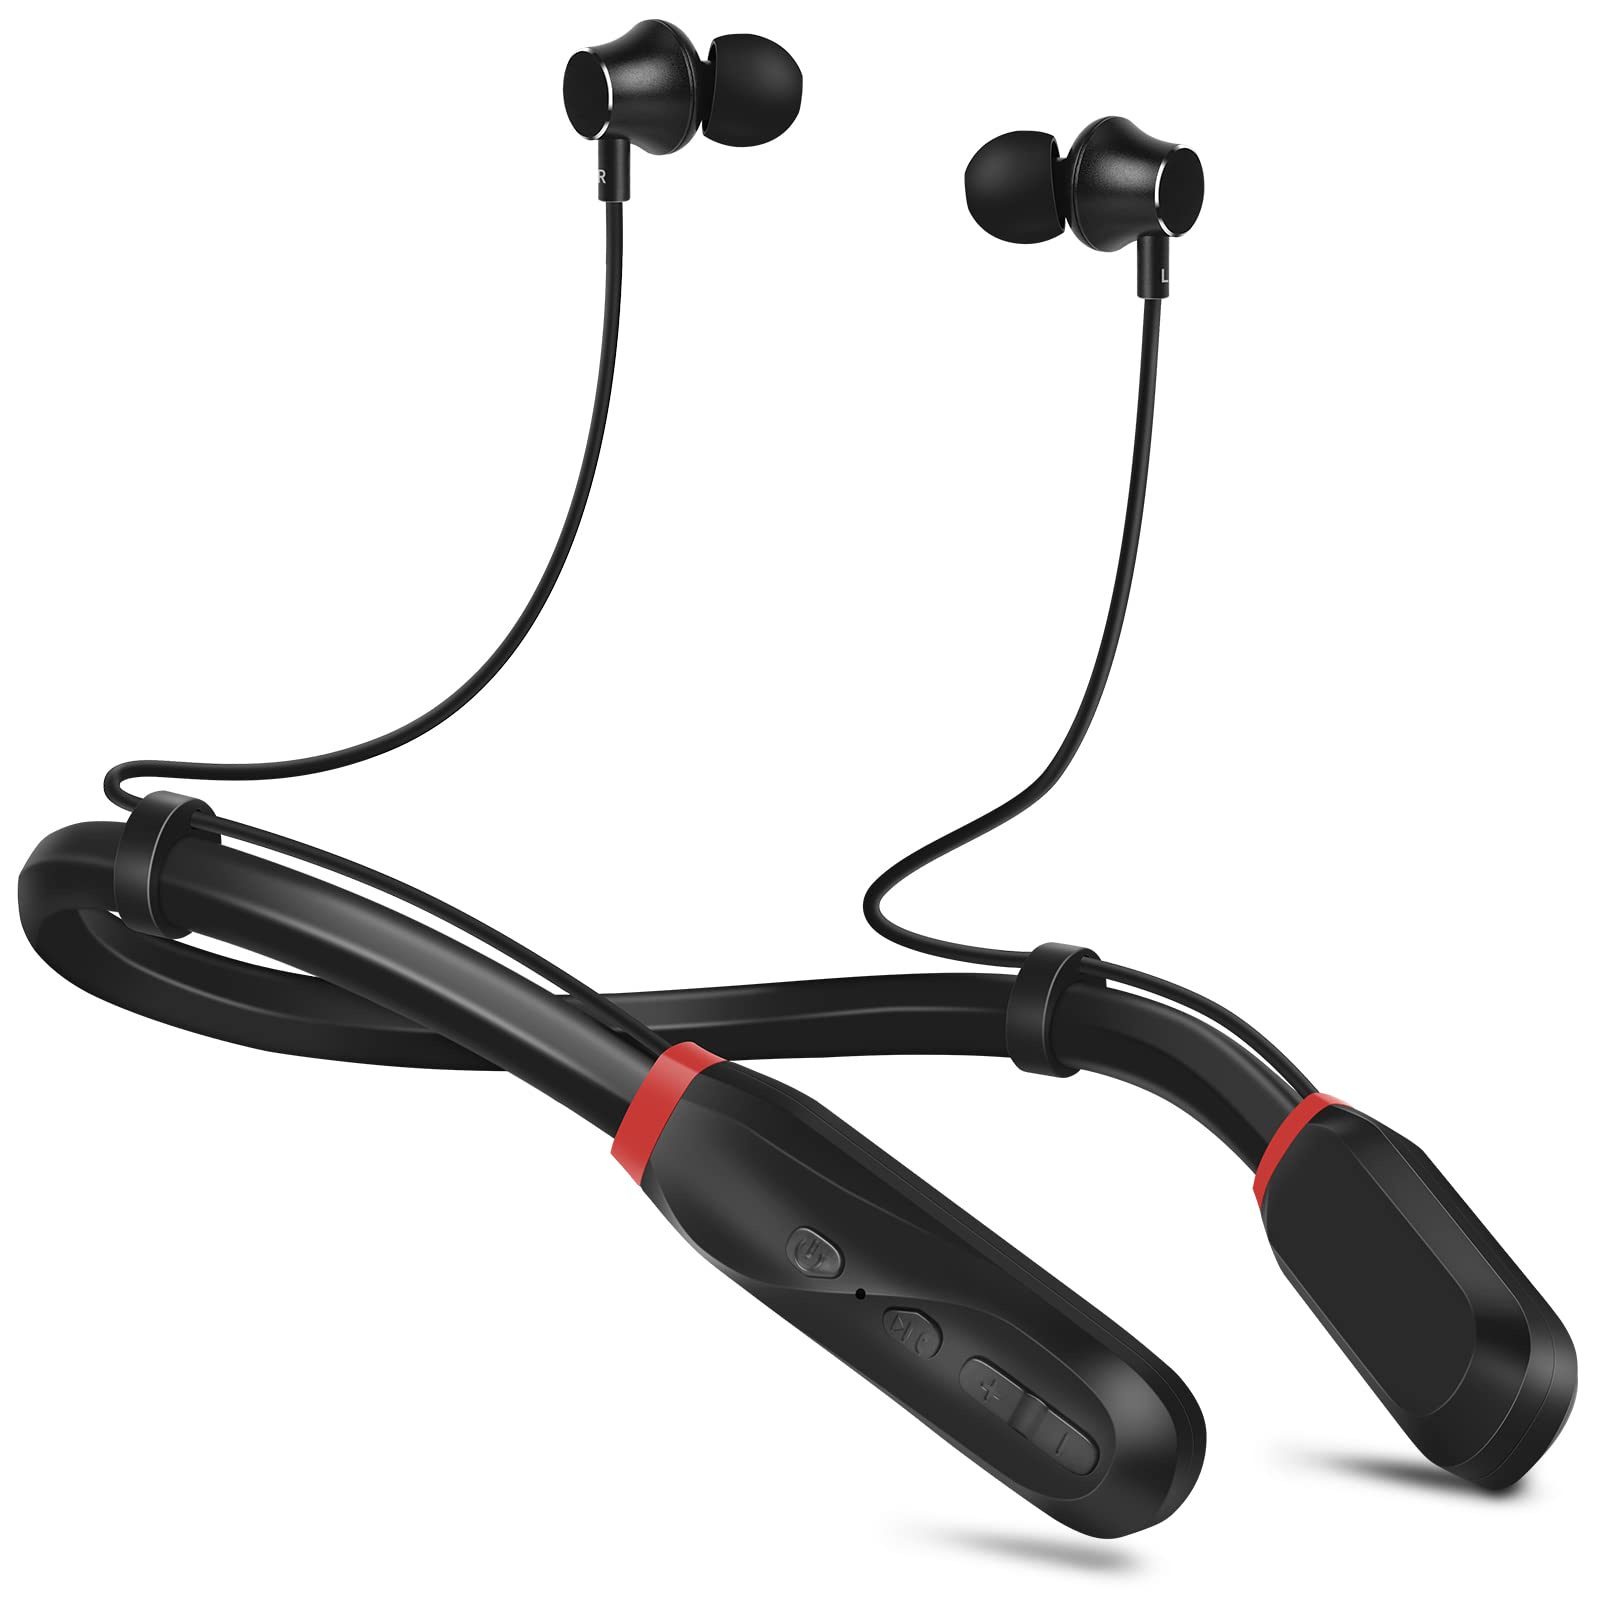 Bluetooth earbuds not showing up on device list